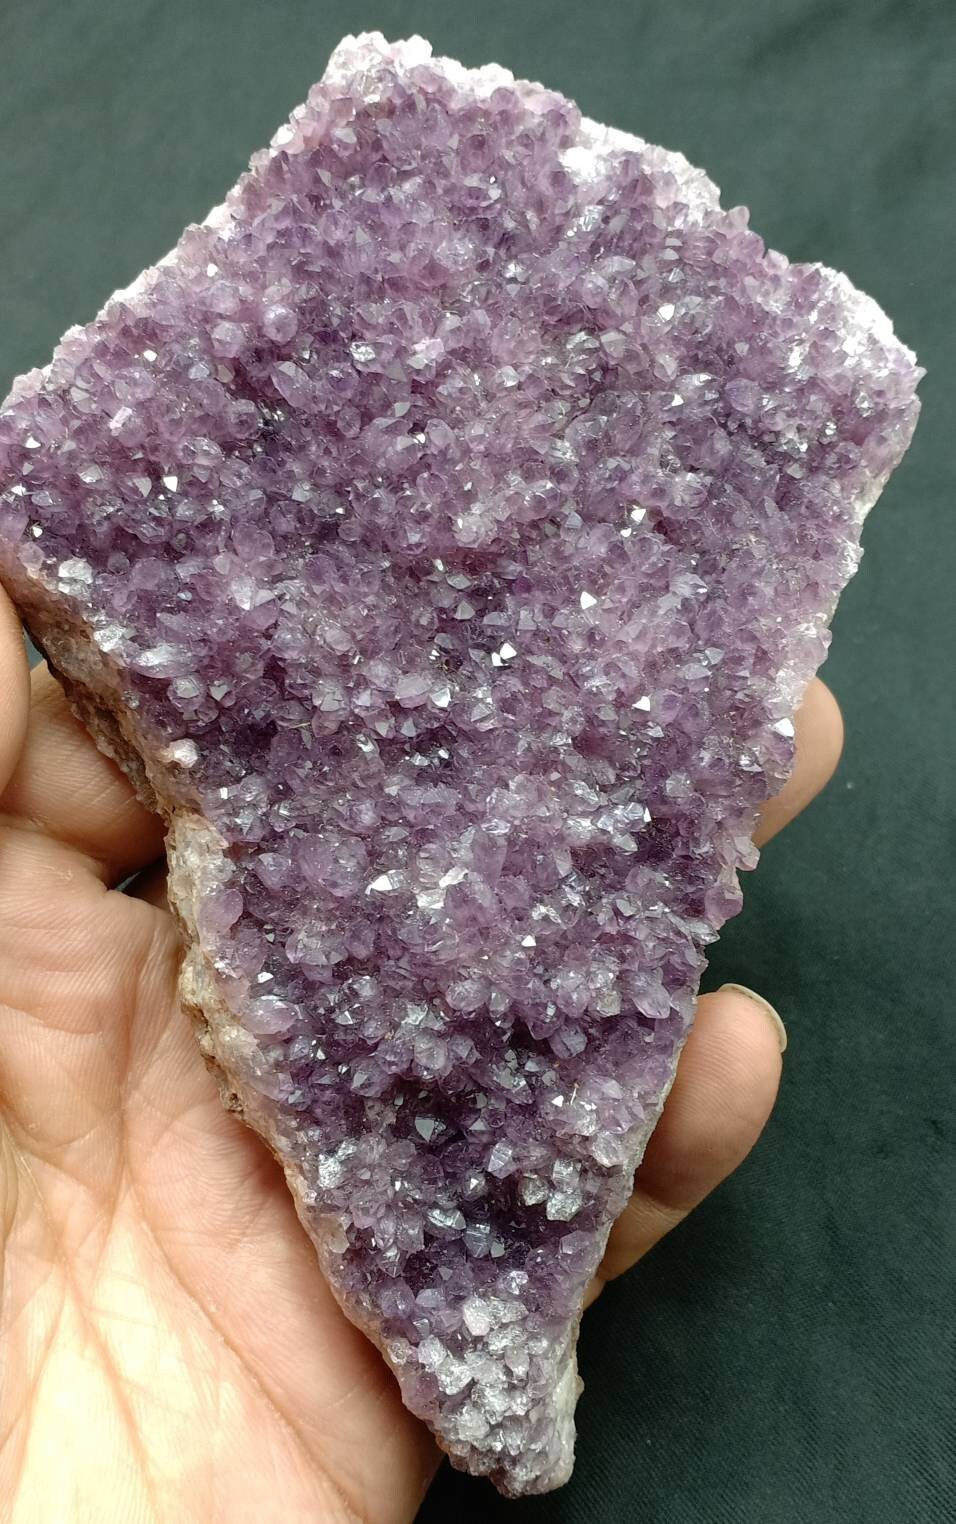 Single Beautiful Drusy Amethyst crystals Cluster plate